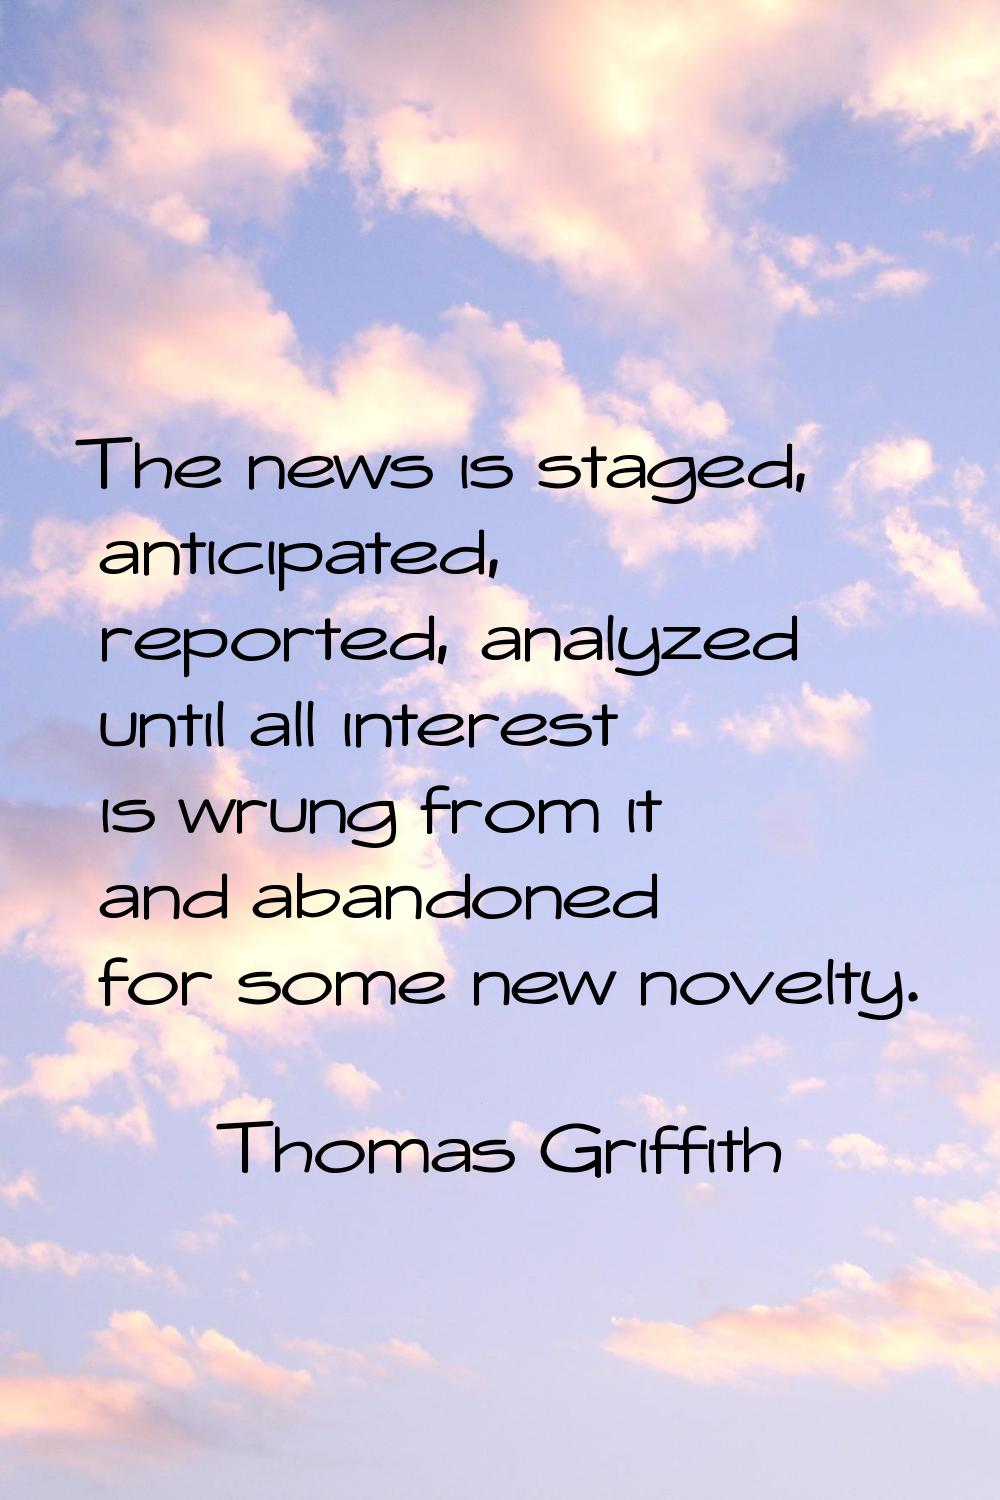 The news is staged, anticipated, reported, analyzed until all interest is wrung from it and abandon